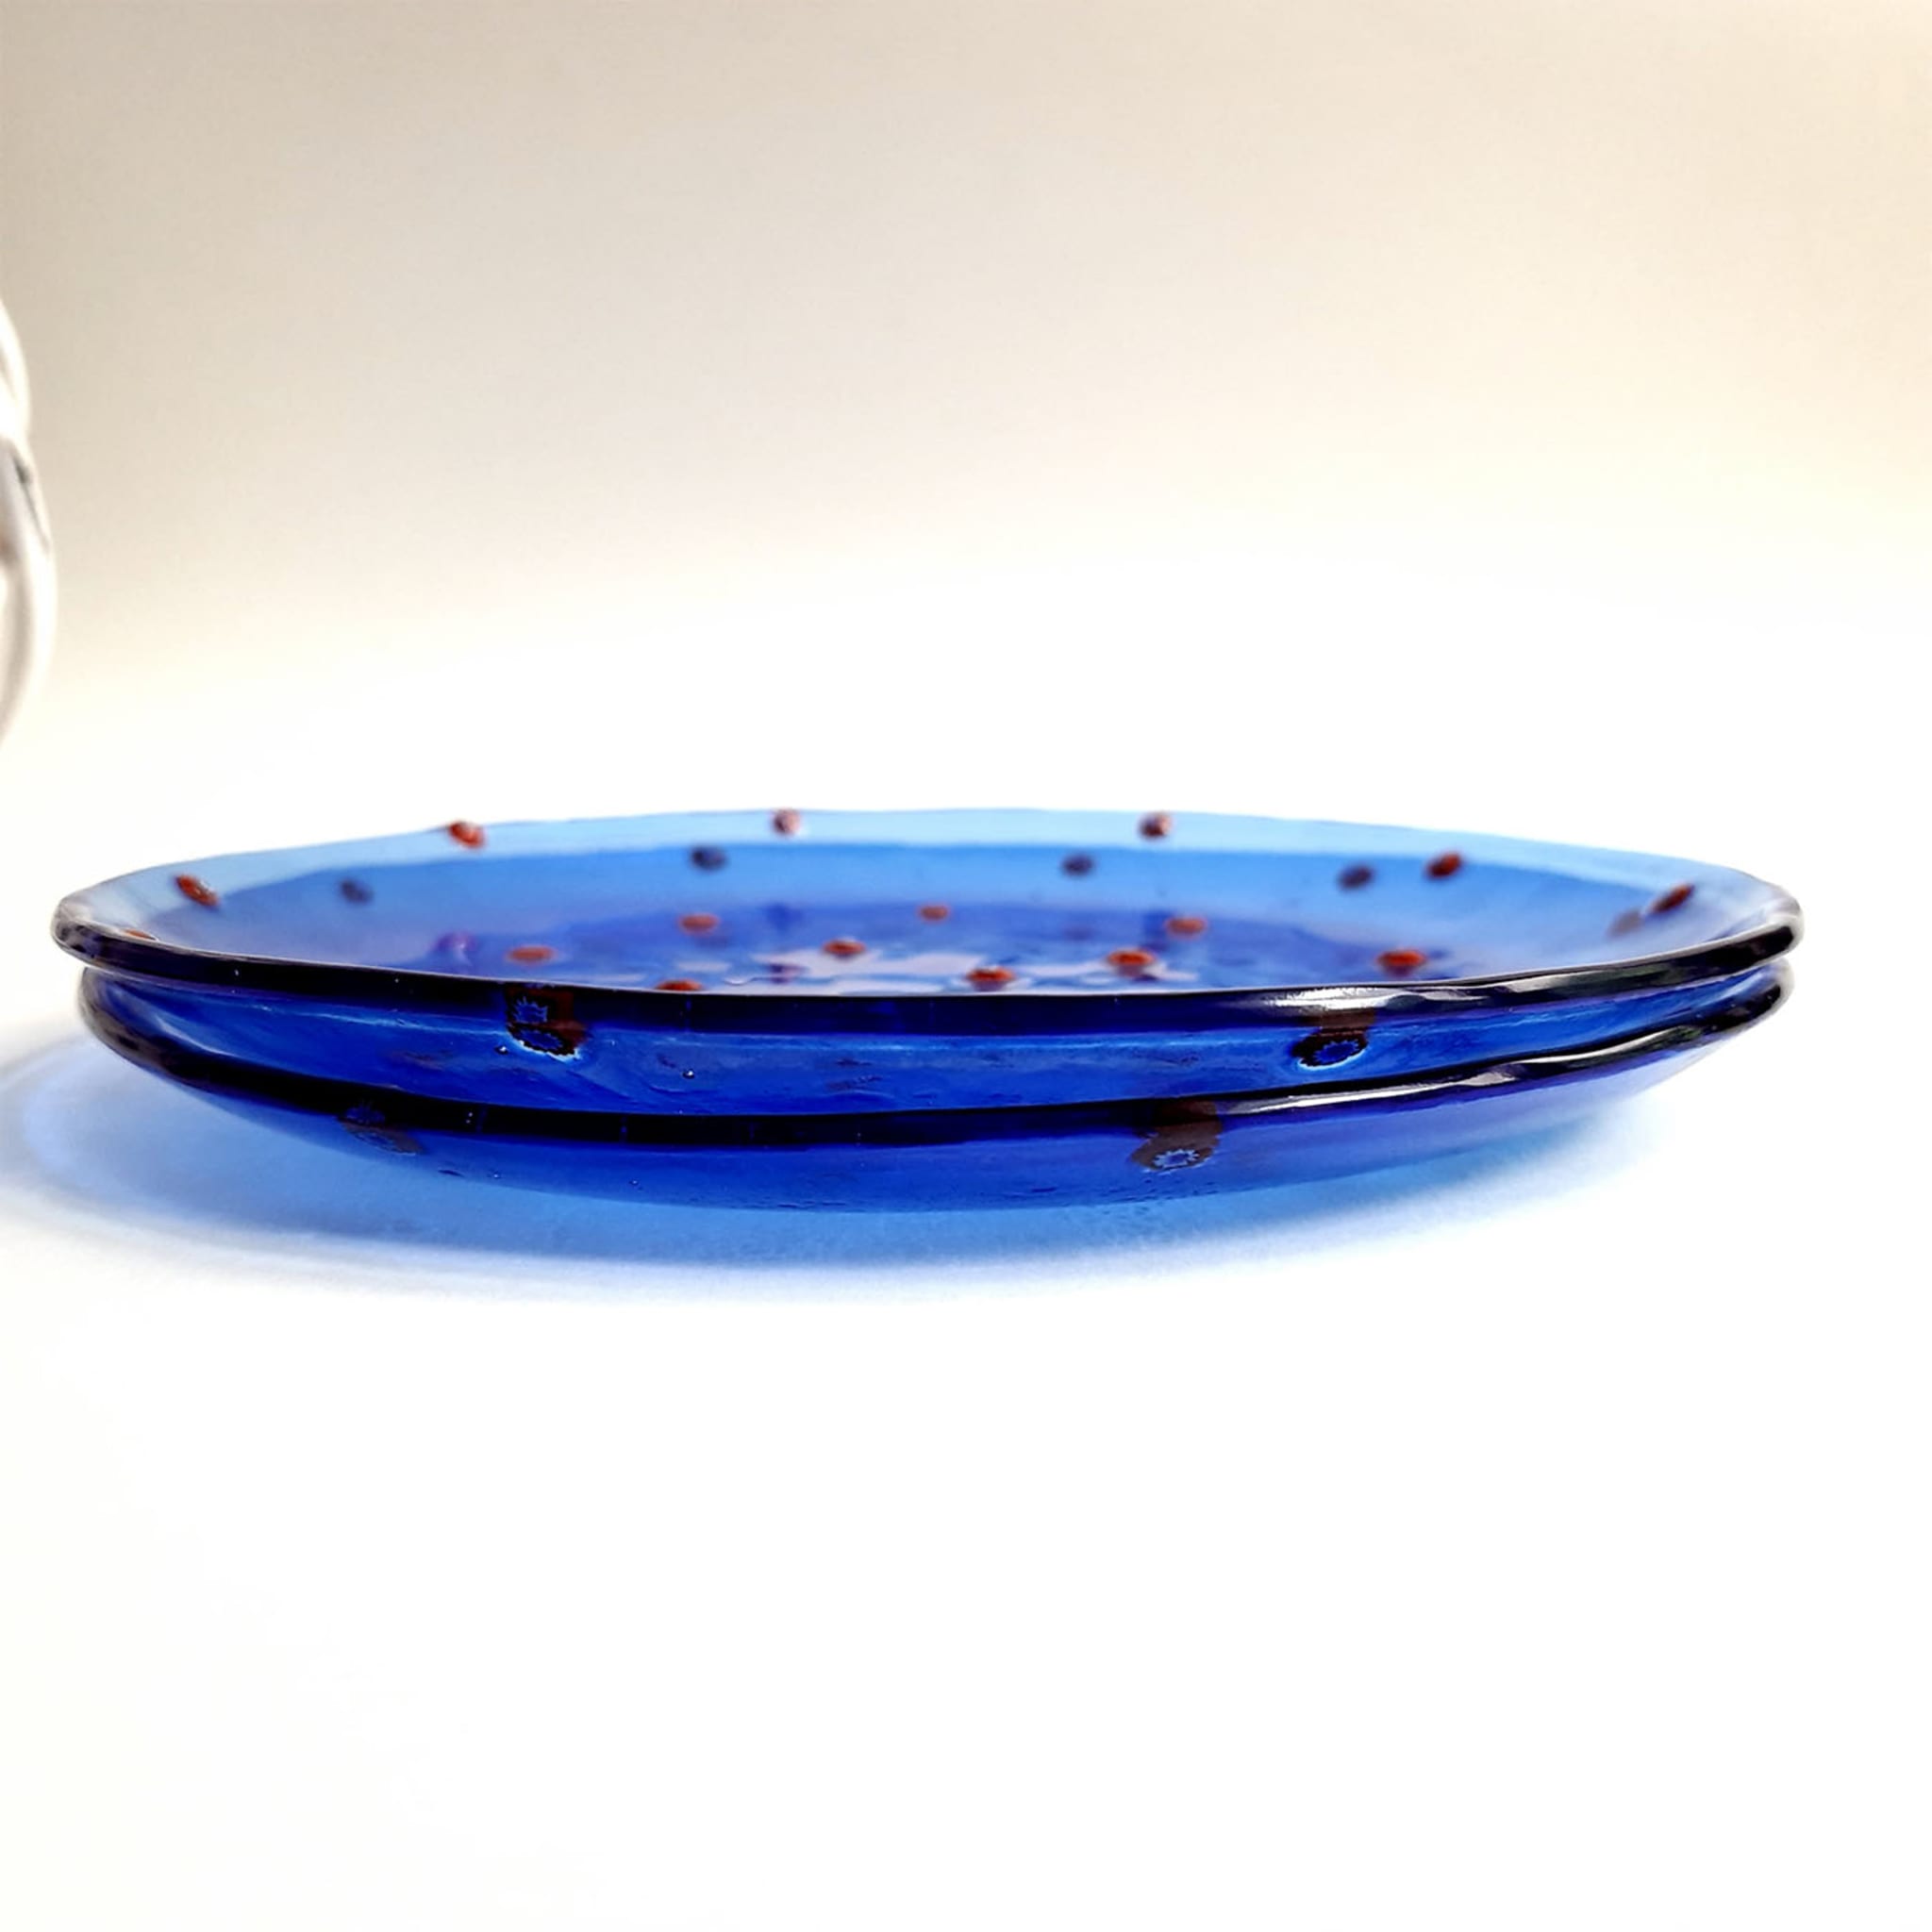 Mare Set Of 4 Blue Floral Glass Dessert Plates with murrina inlays - Alternative view 1